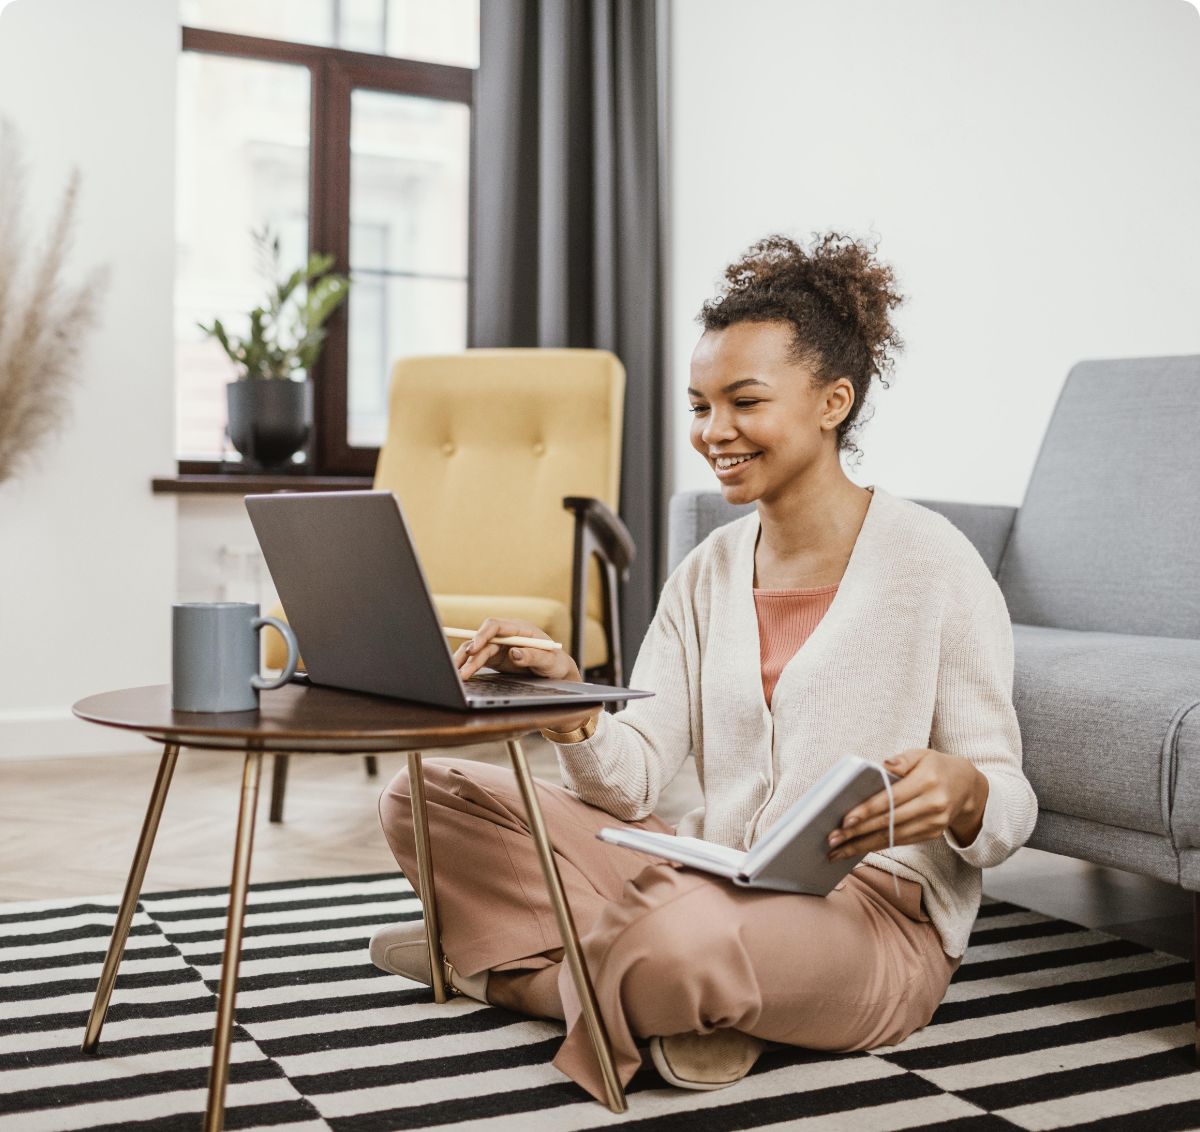  Is your business remote work ready? 